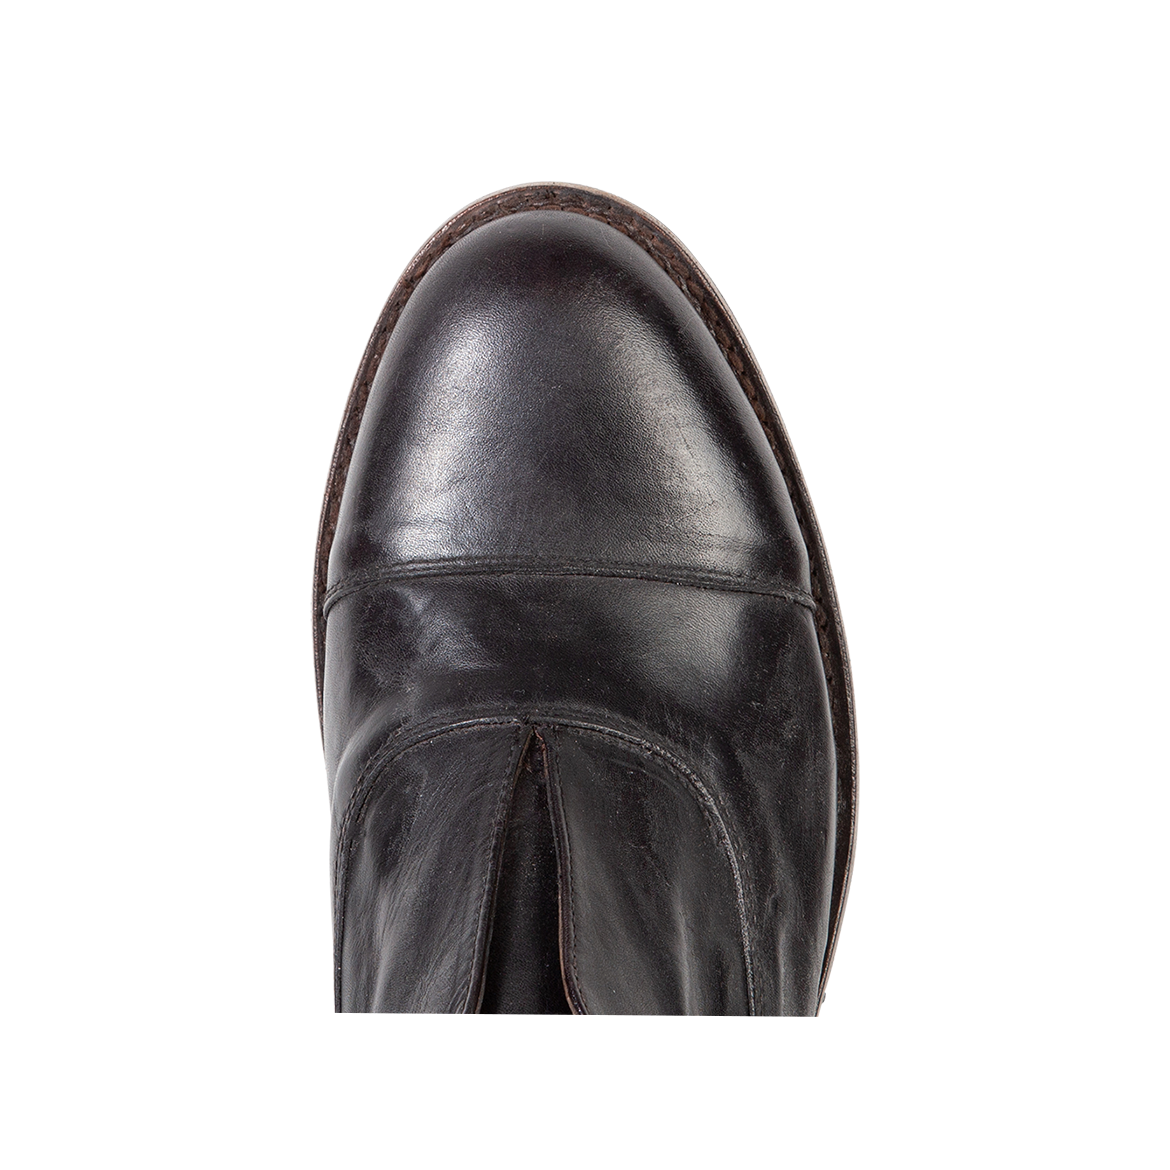 Top view showing almond toe and loafer construction on FREEBIRD men's Detrick black shoe